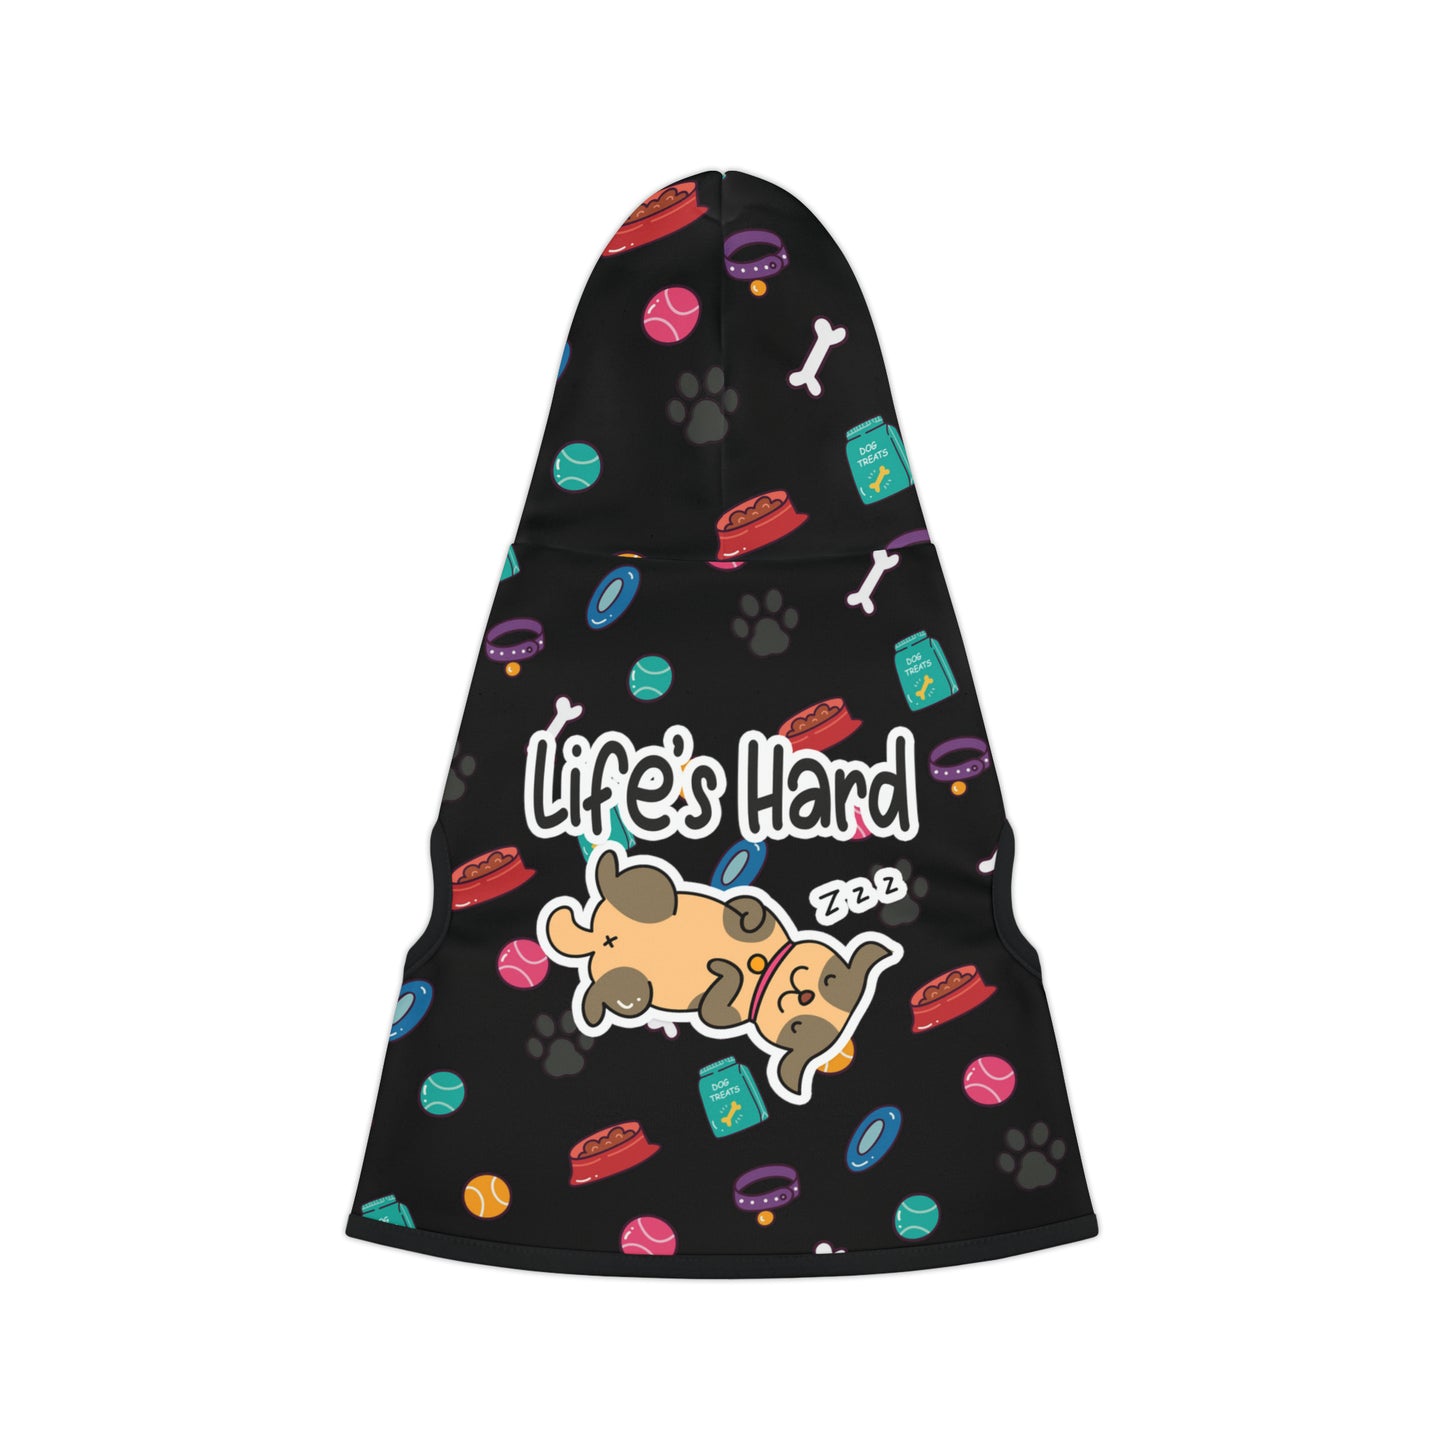 A pet hoodie with a beautiful pattern design featuring all things dog love. A smiling dog sleeping below a message that says "Life's hard". Hoodie's Color is black